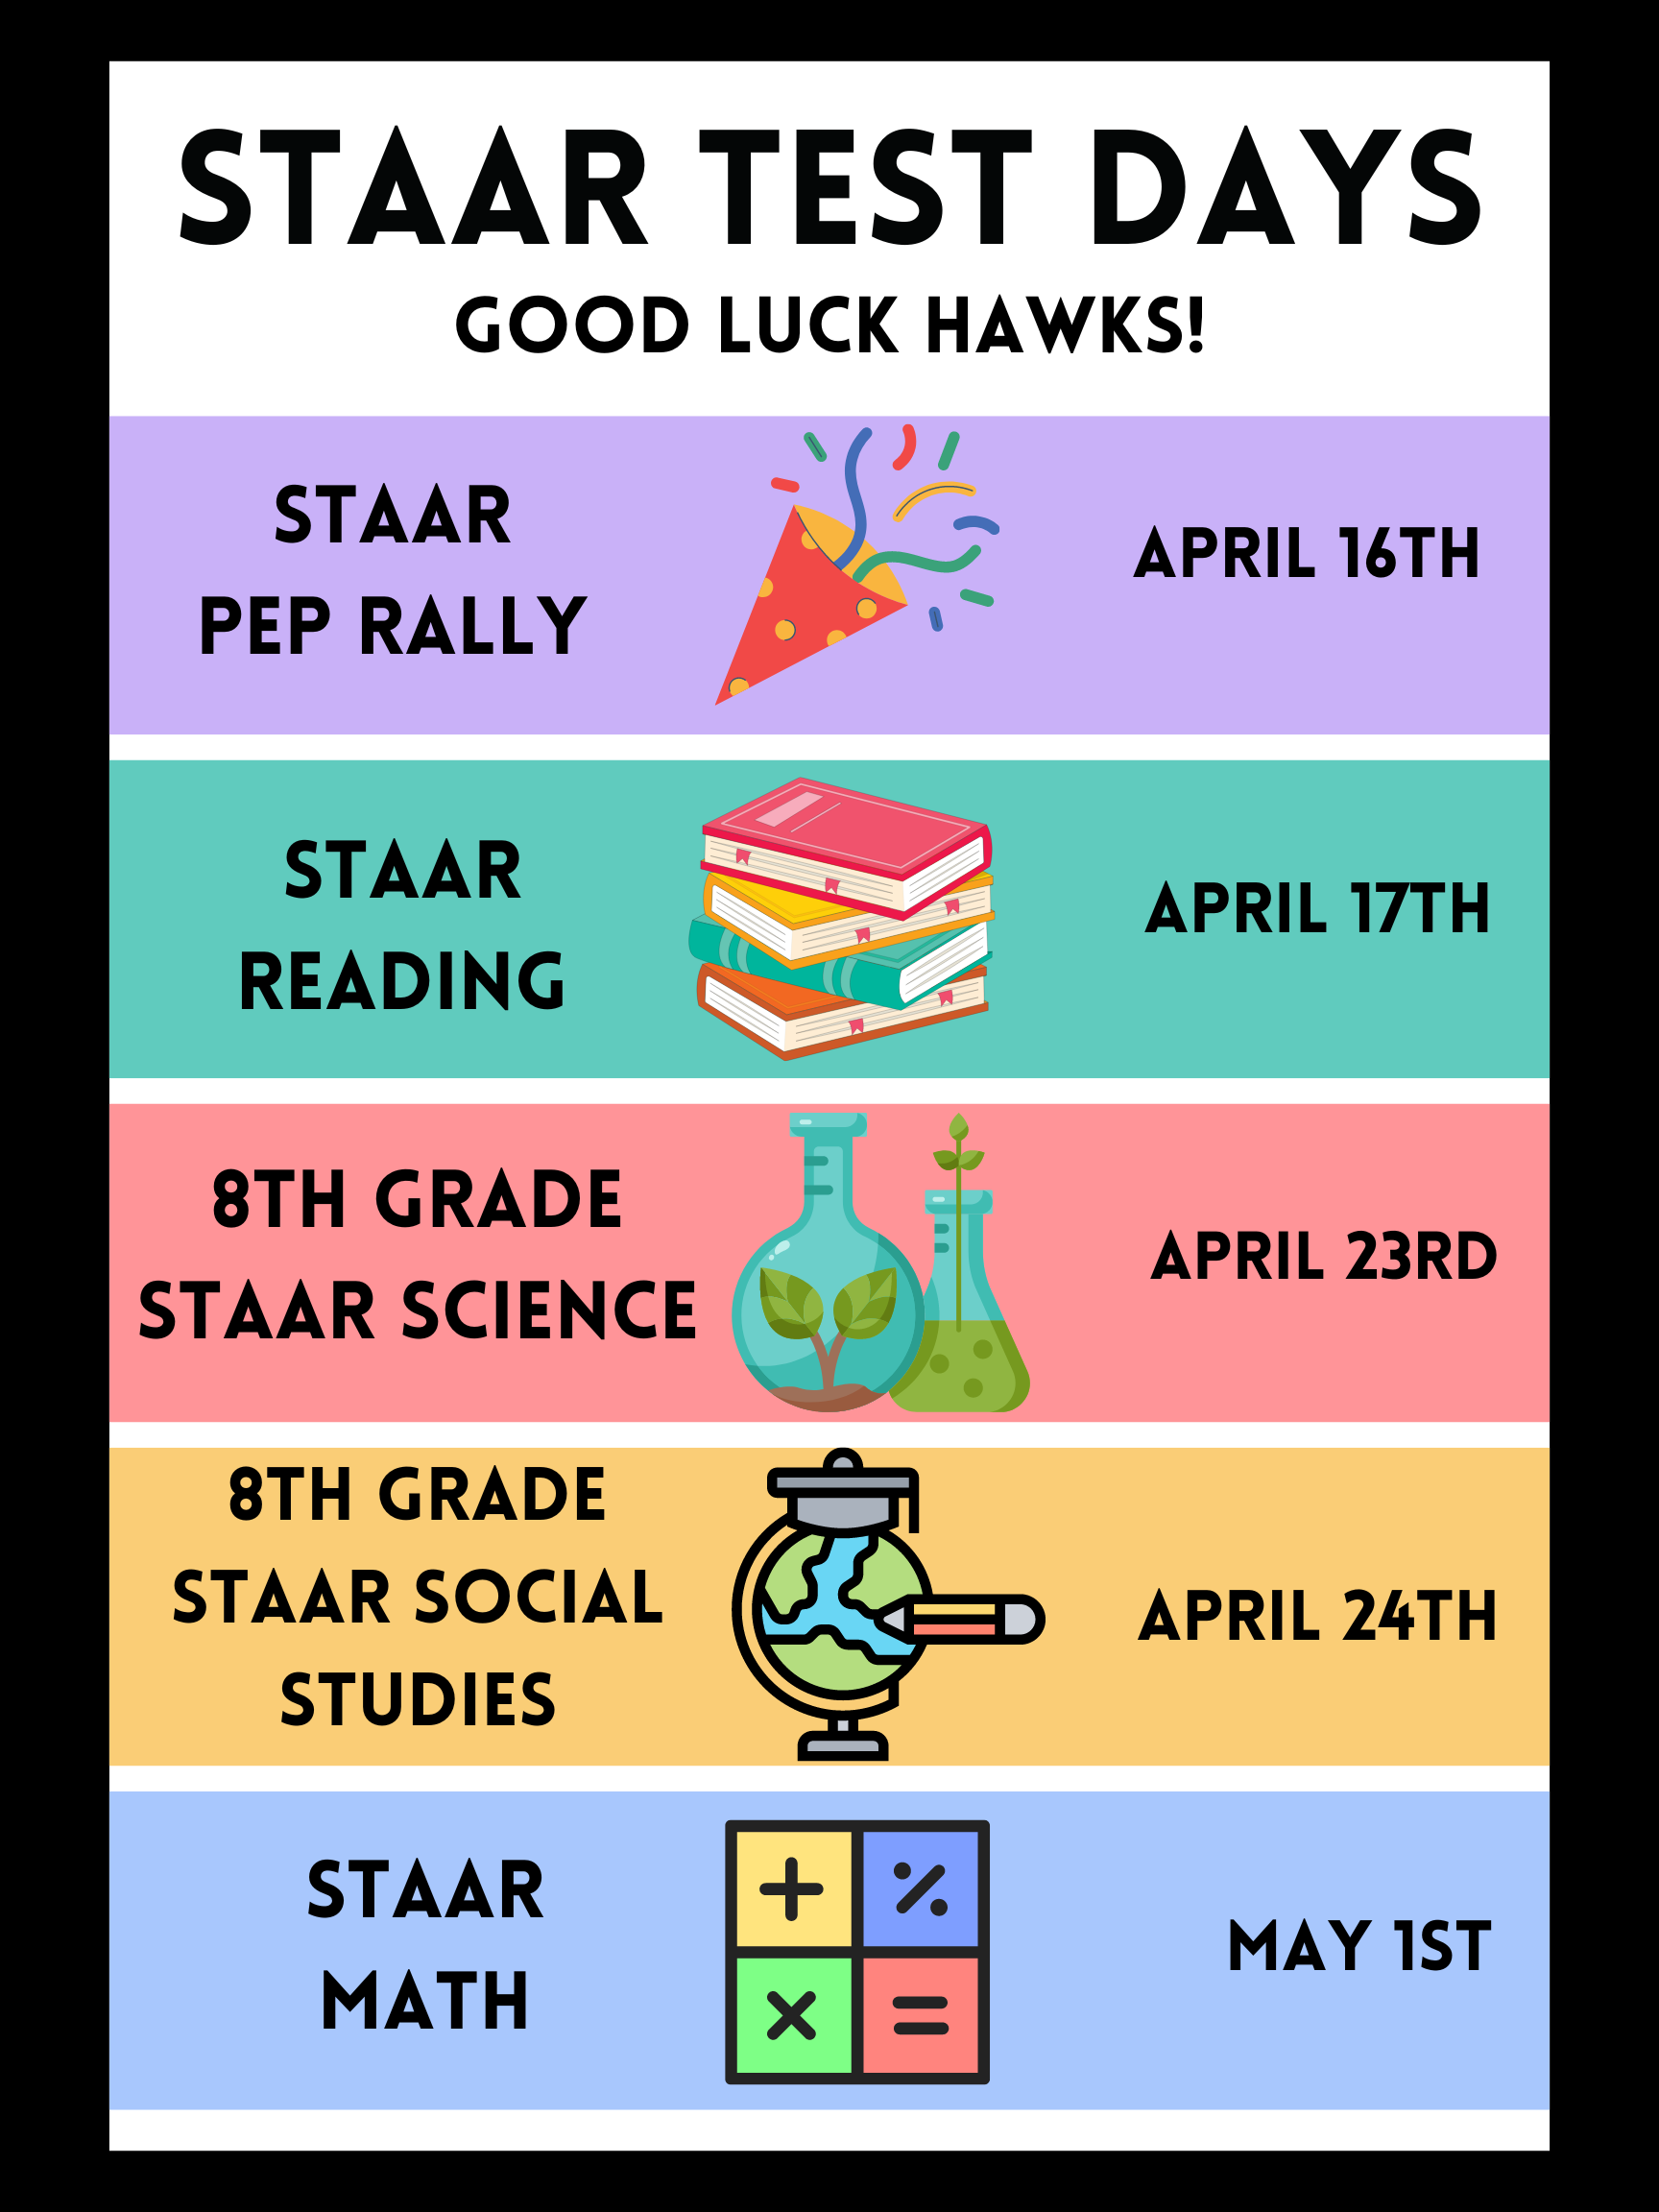 Star Test Days Poster: A colorful poster with the words "Star Test Days" in bold letters, describing staar dates with images of different sizes and colors.